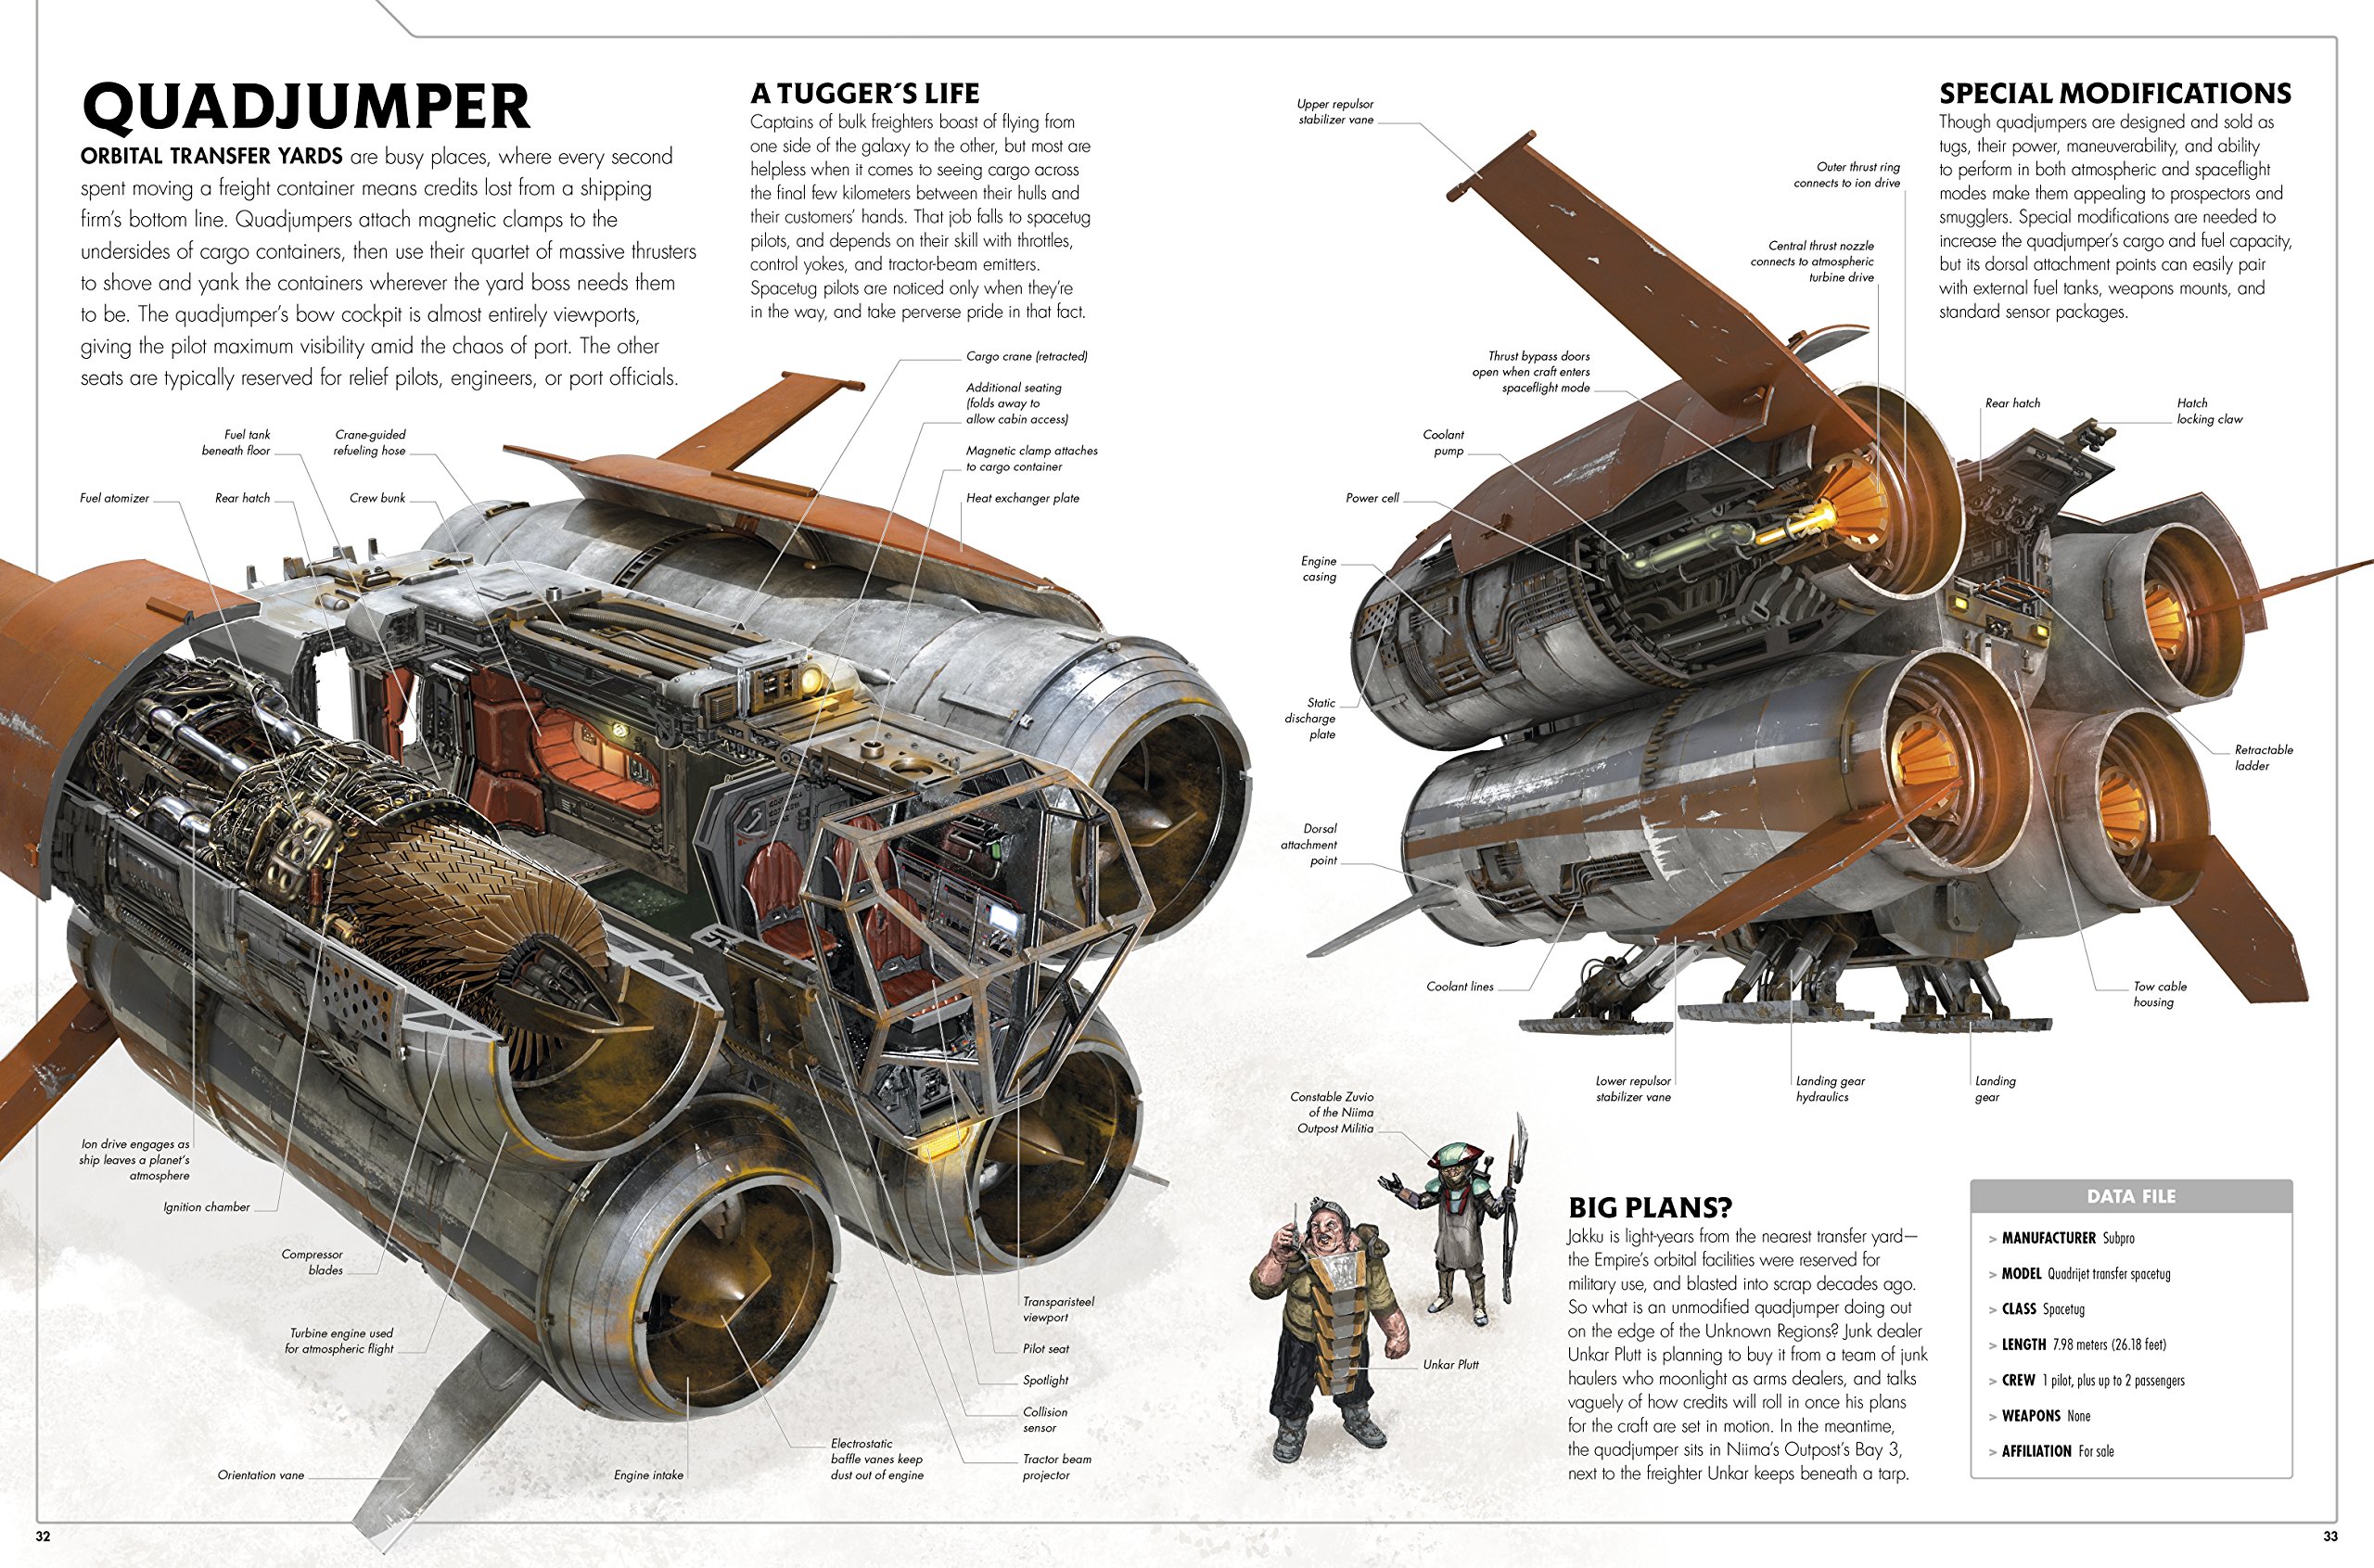 Star Wars: The Force Awakens Incredible Cross-Sections. 